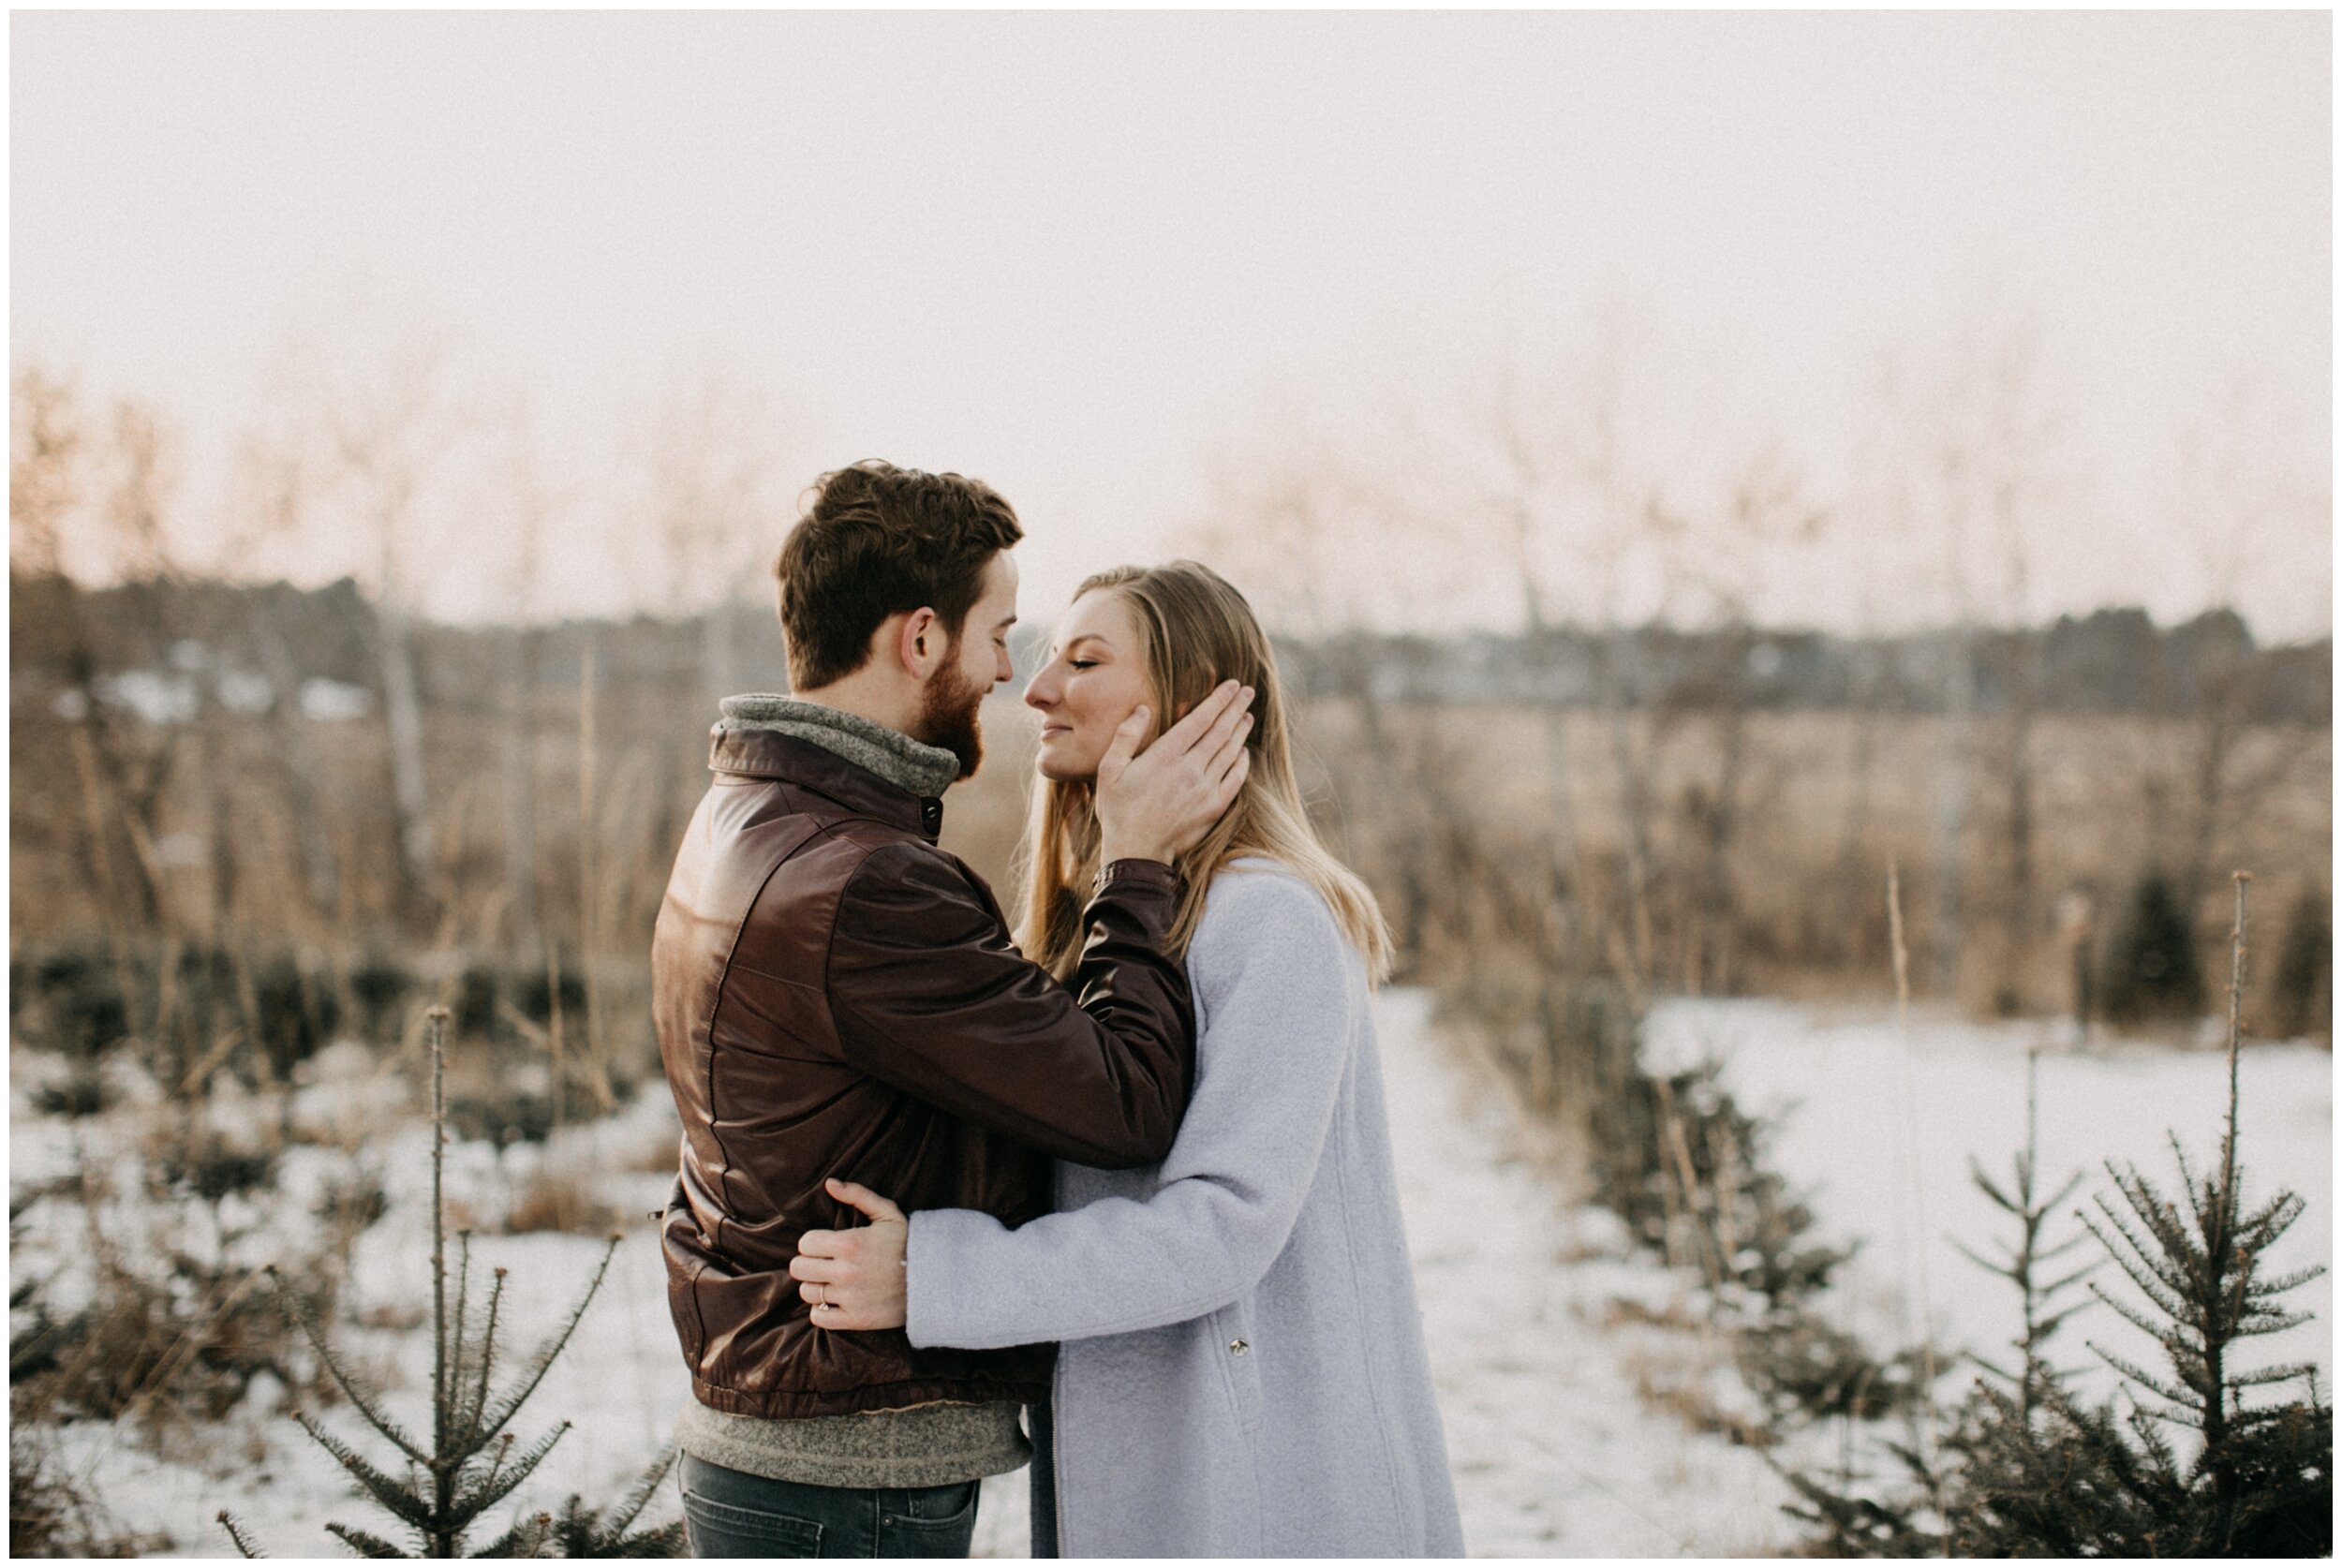 Boyfriend touching girlfriends face during engagement session at Minnesota Christmas tree farm